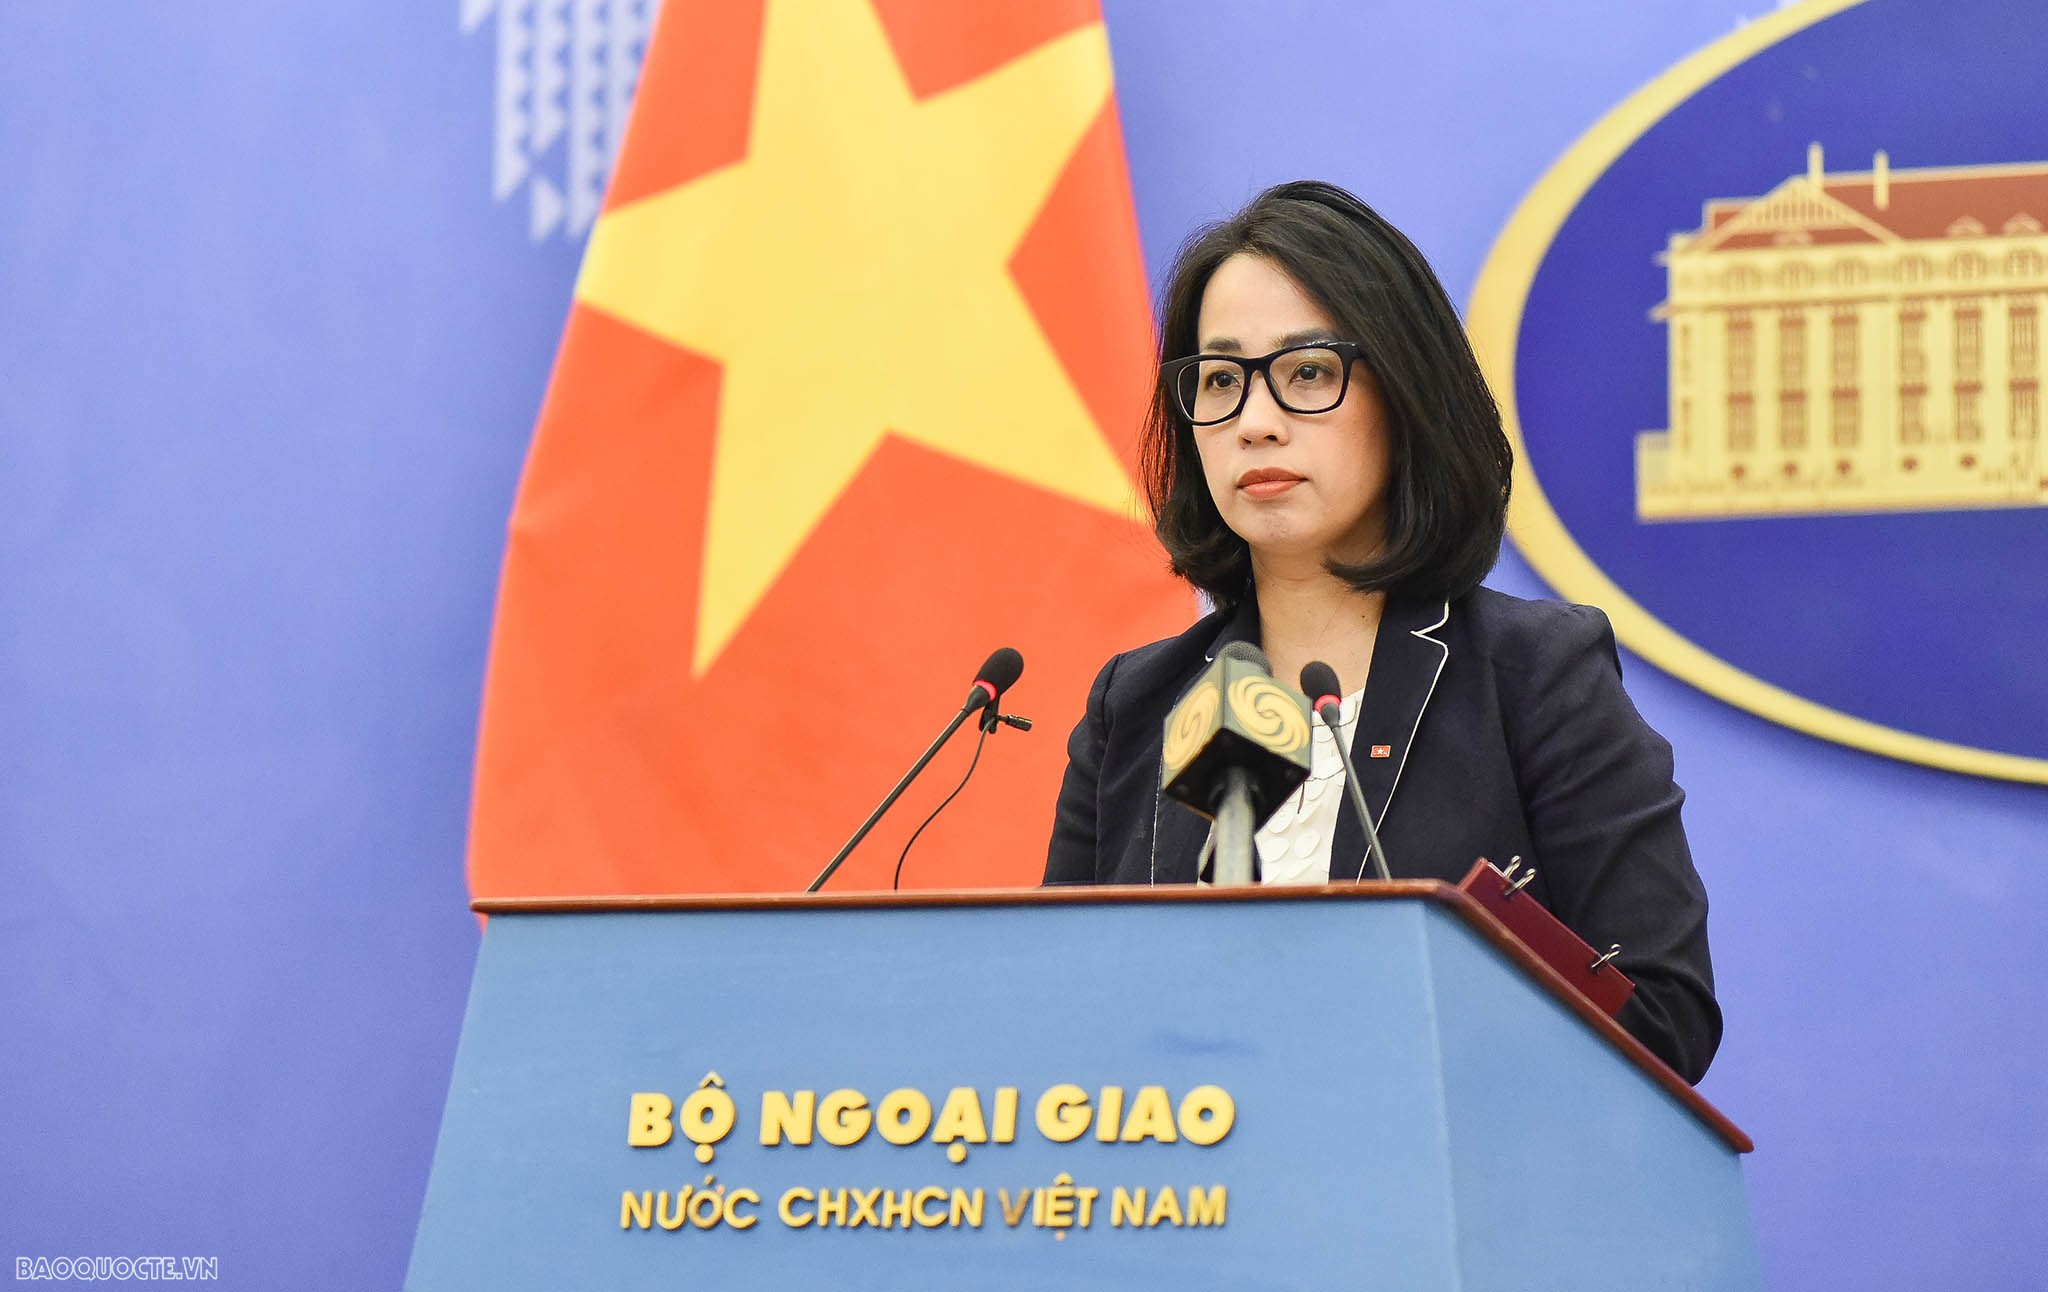 Vietnam hopes to continue close tourism cooperation with China: Deputy Spokesperson